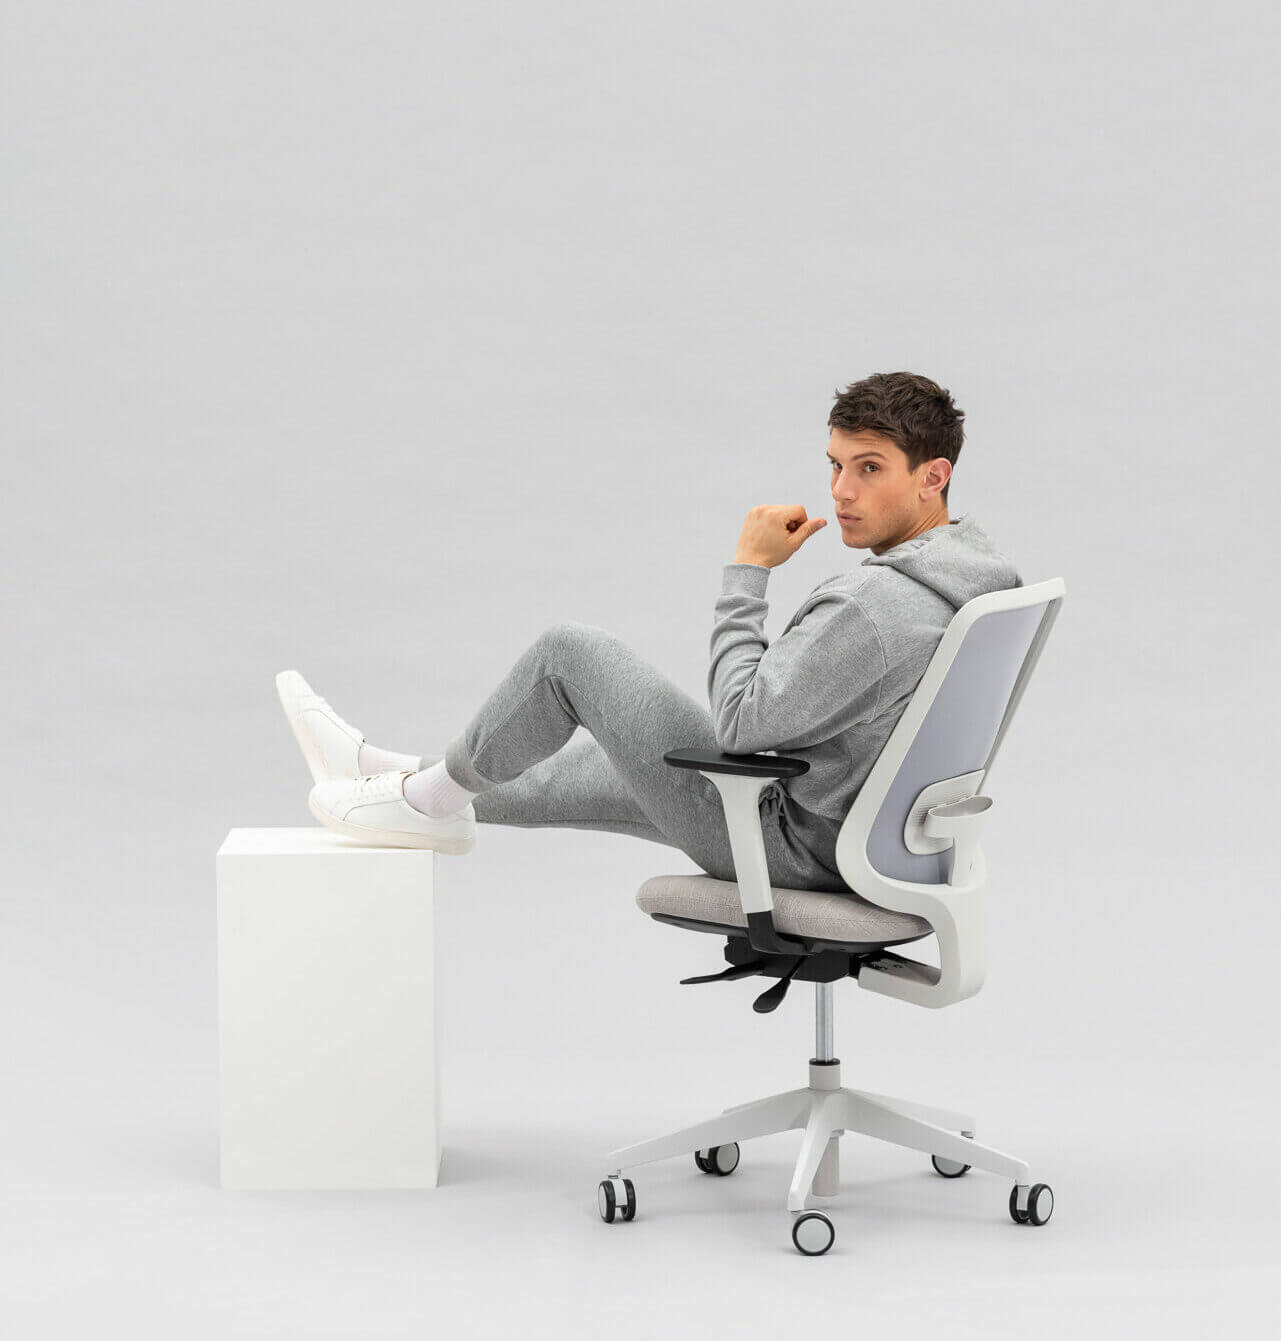 Person Sitting on Task One Grey Frame Office Chair With Their Feet on a Box